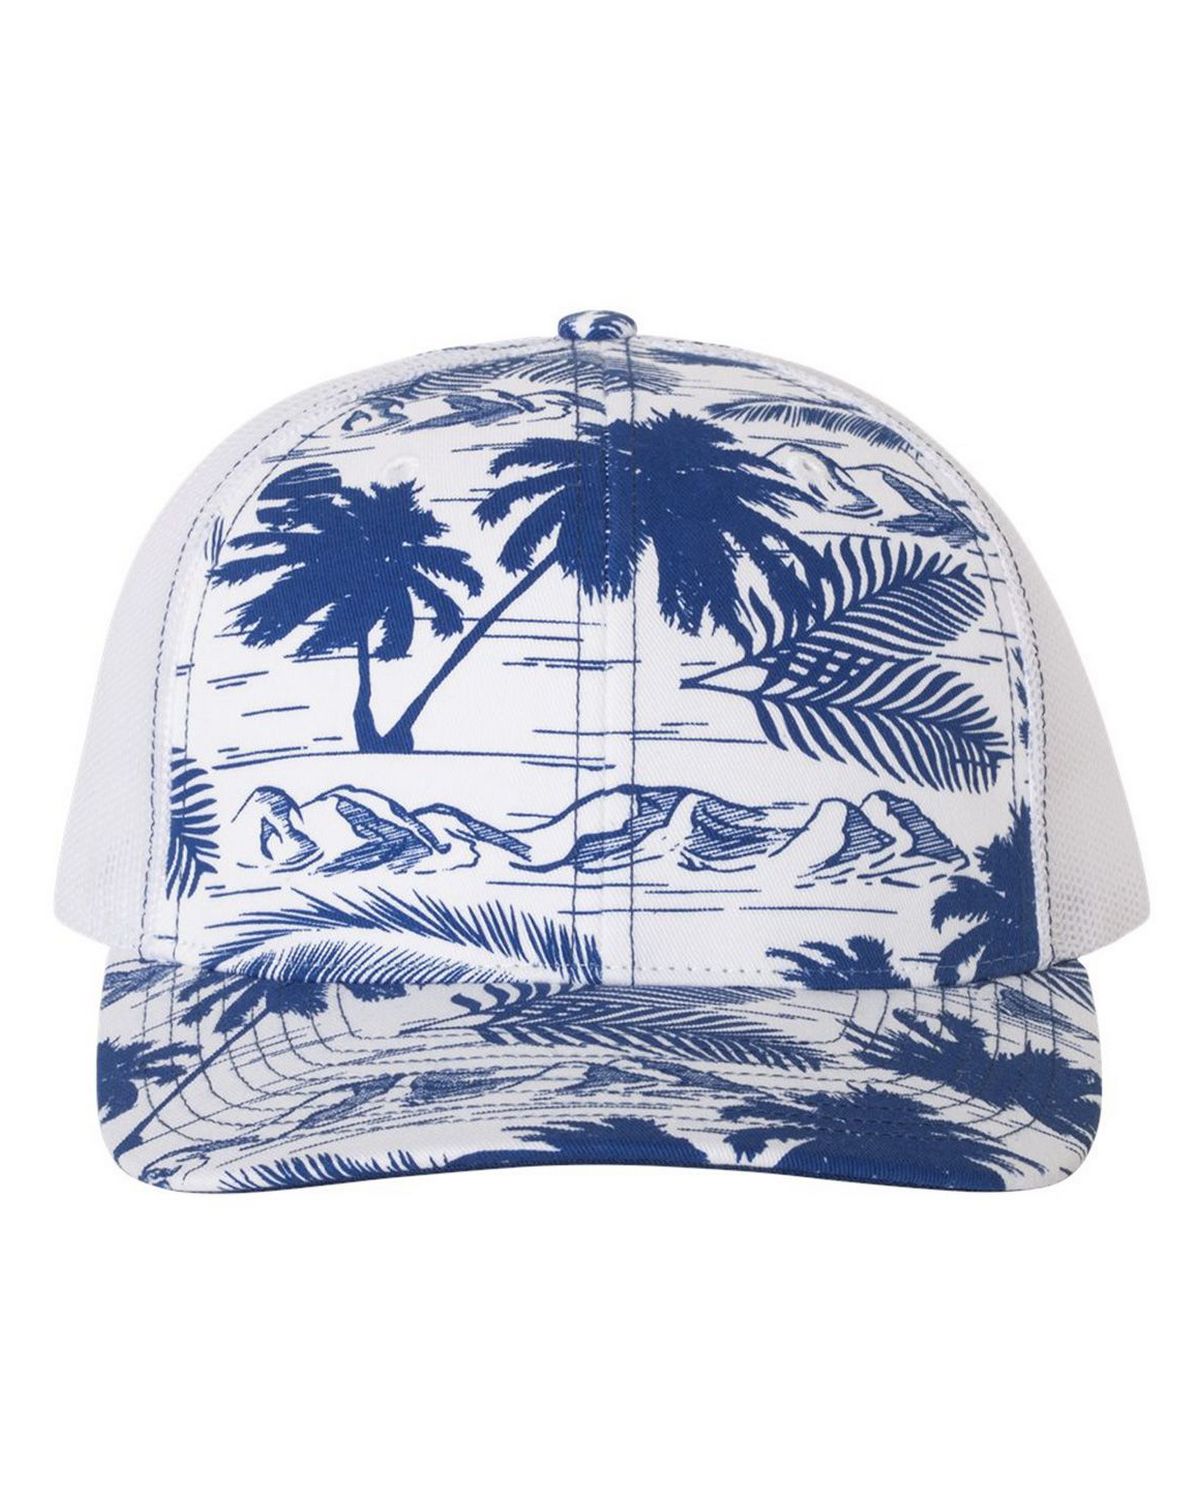 Richardson 112P Patterned Snapback Trucker Cap - Free Shipping Available